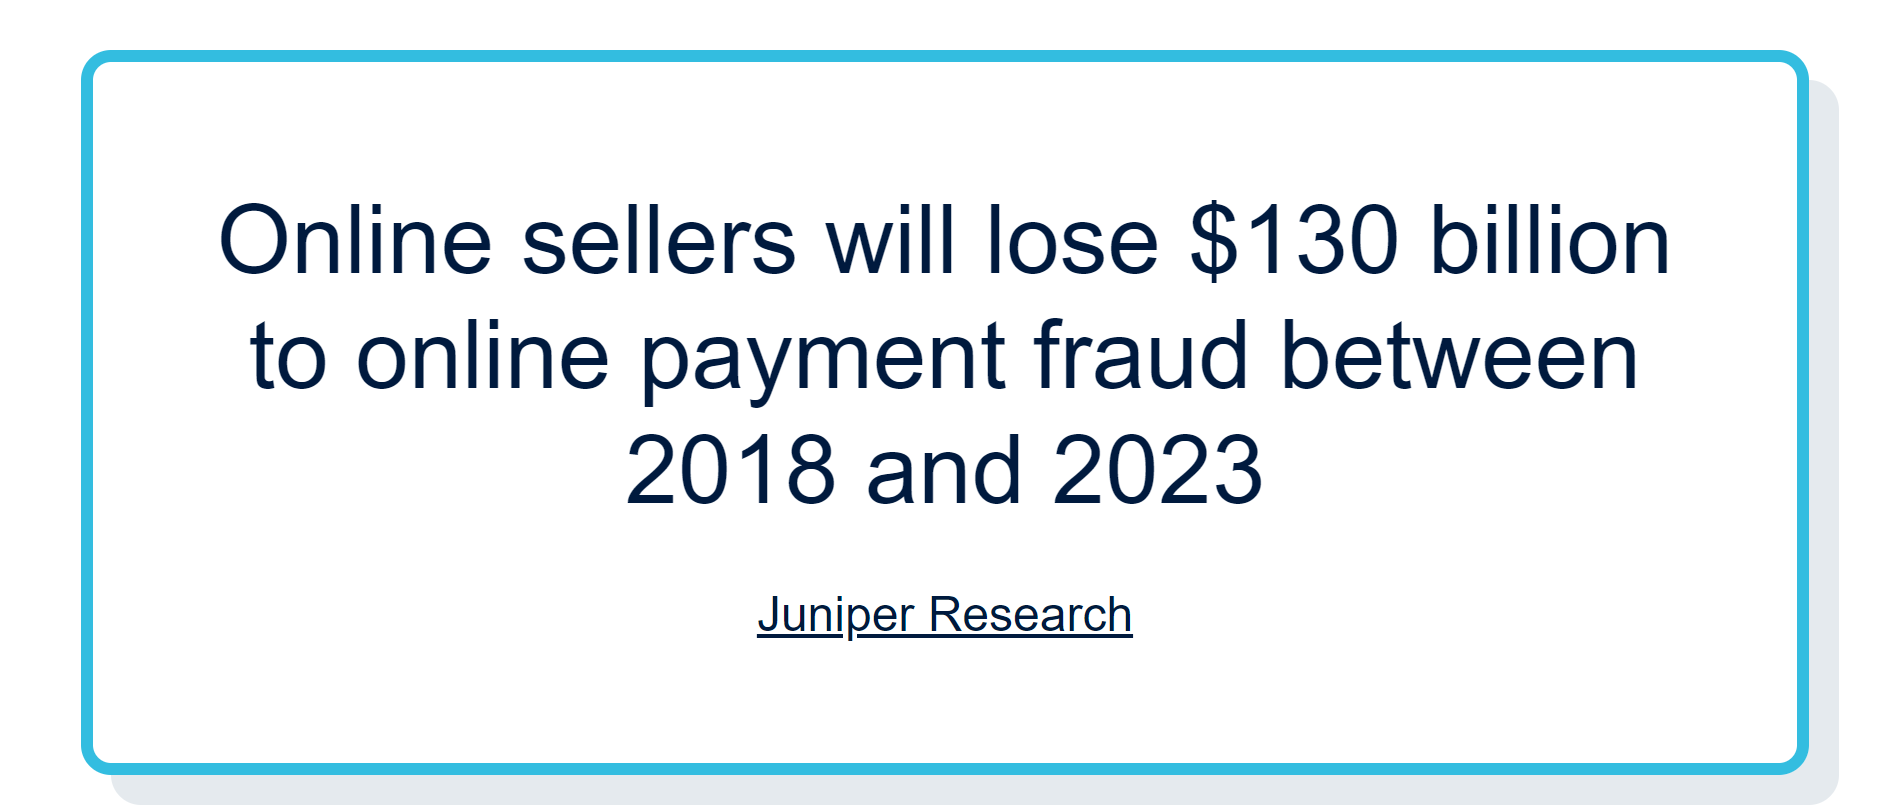 The cost of fraud to online sellers